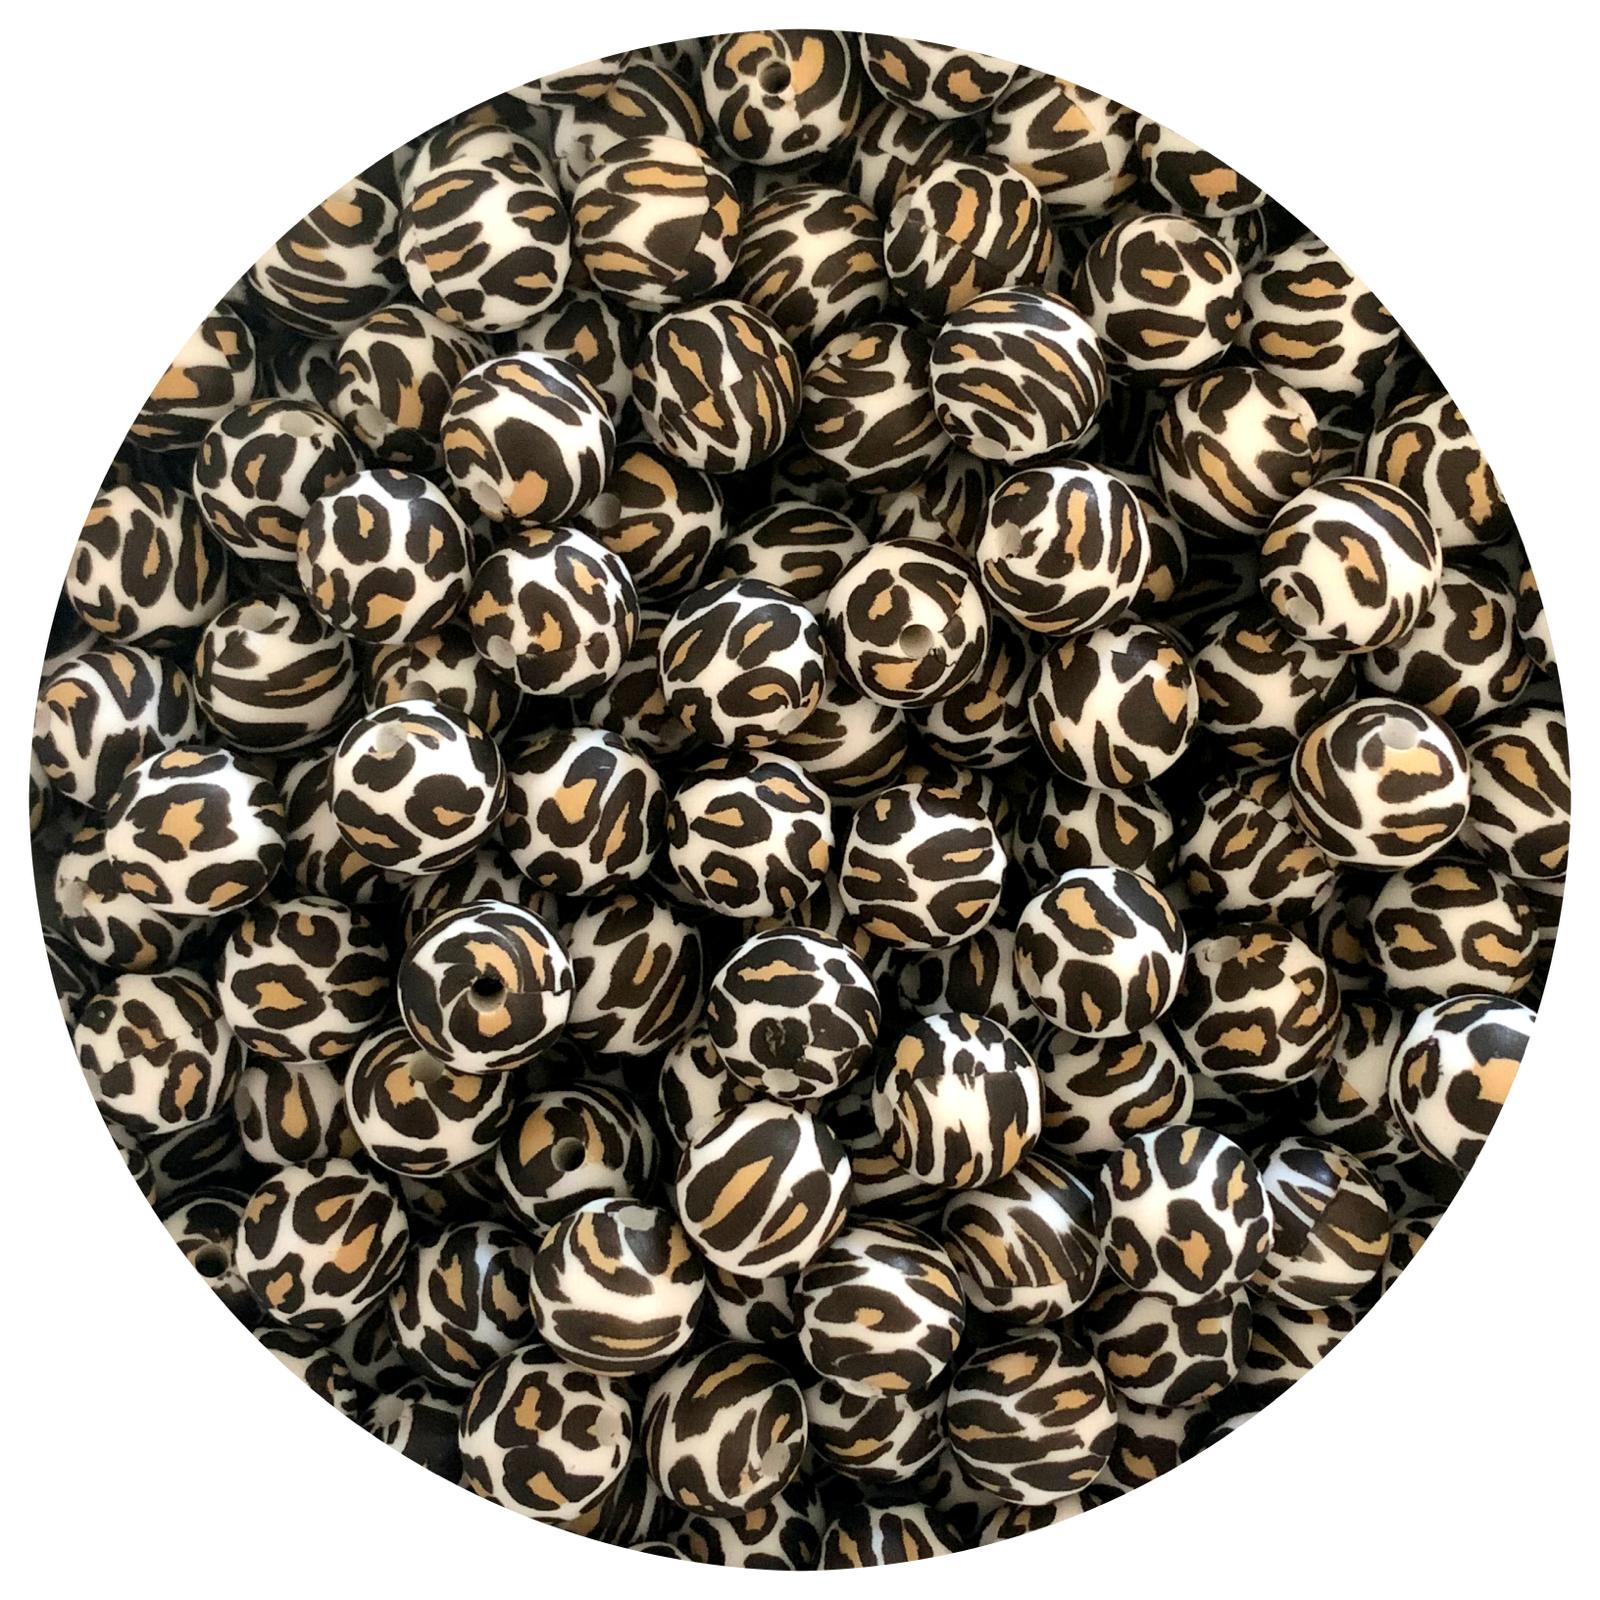 Snow Leopard - 12mm Round Silicone Beads - 10 beads